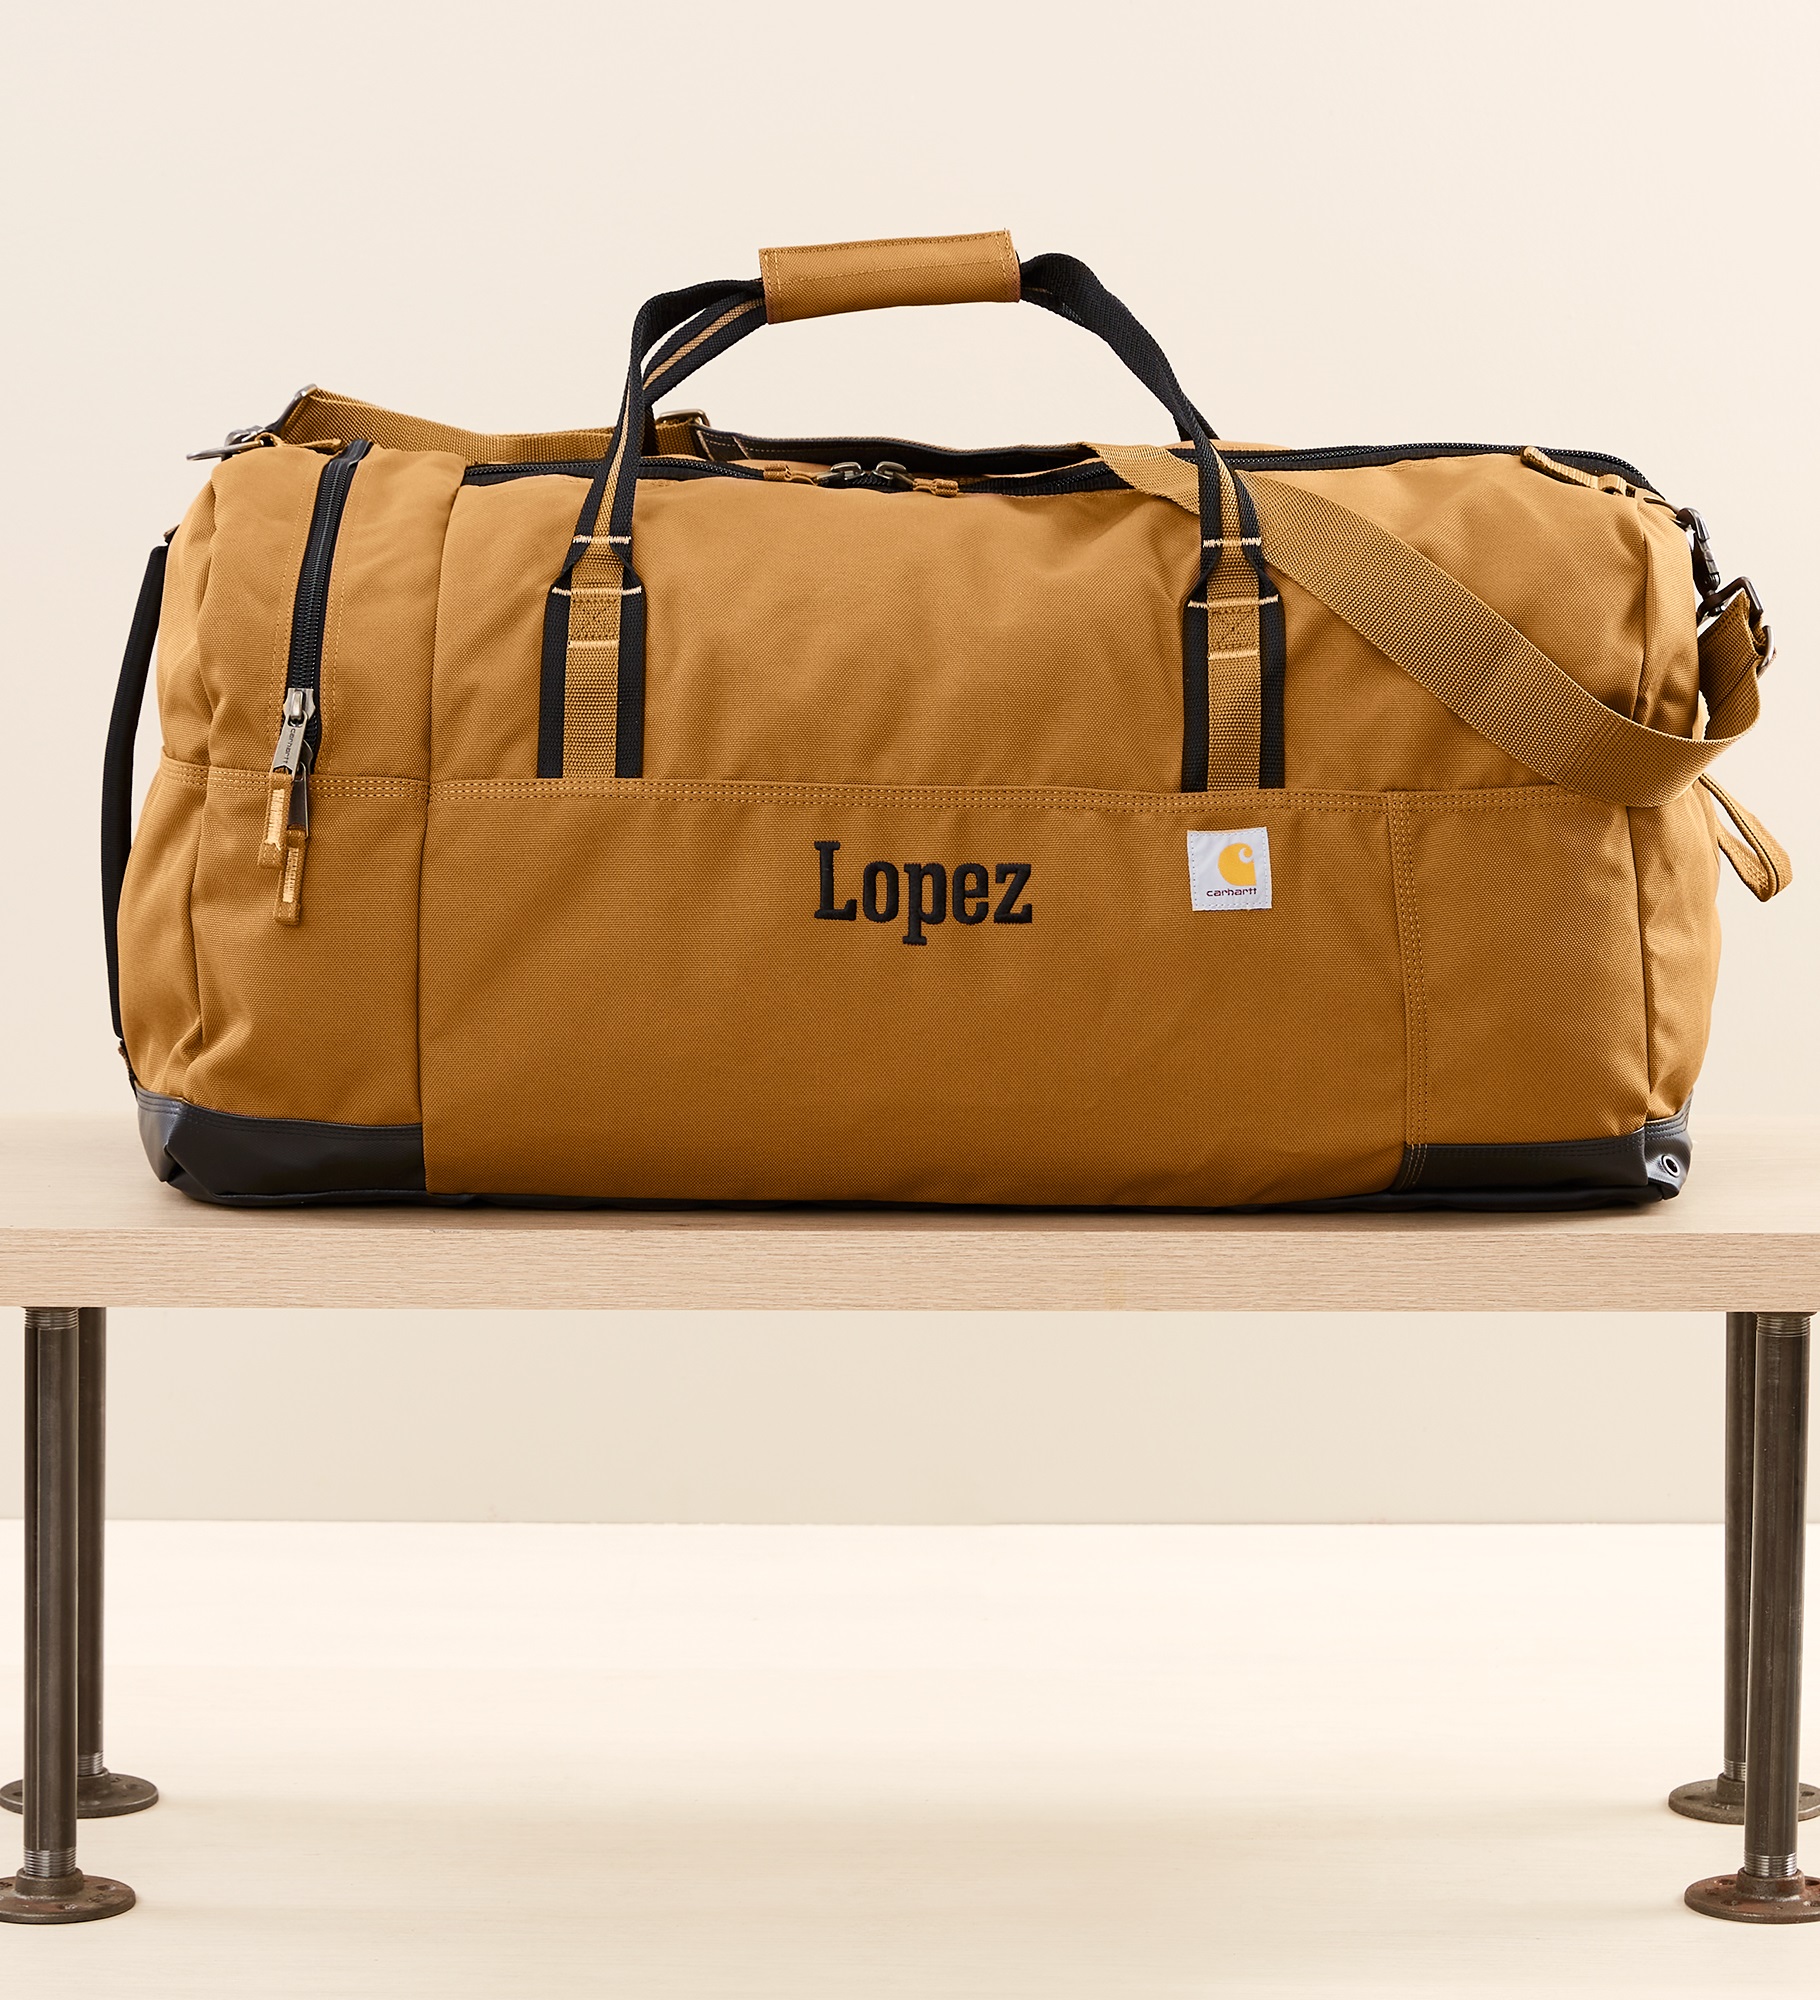 Carhartt ® Embroidered 30" Foundry Duffel Bag